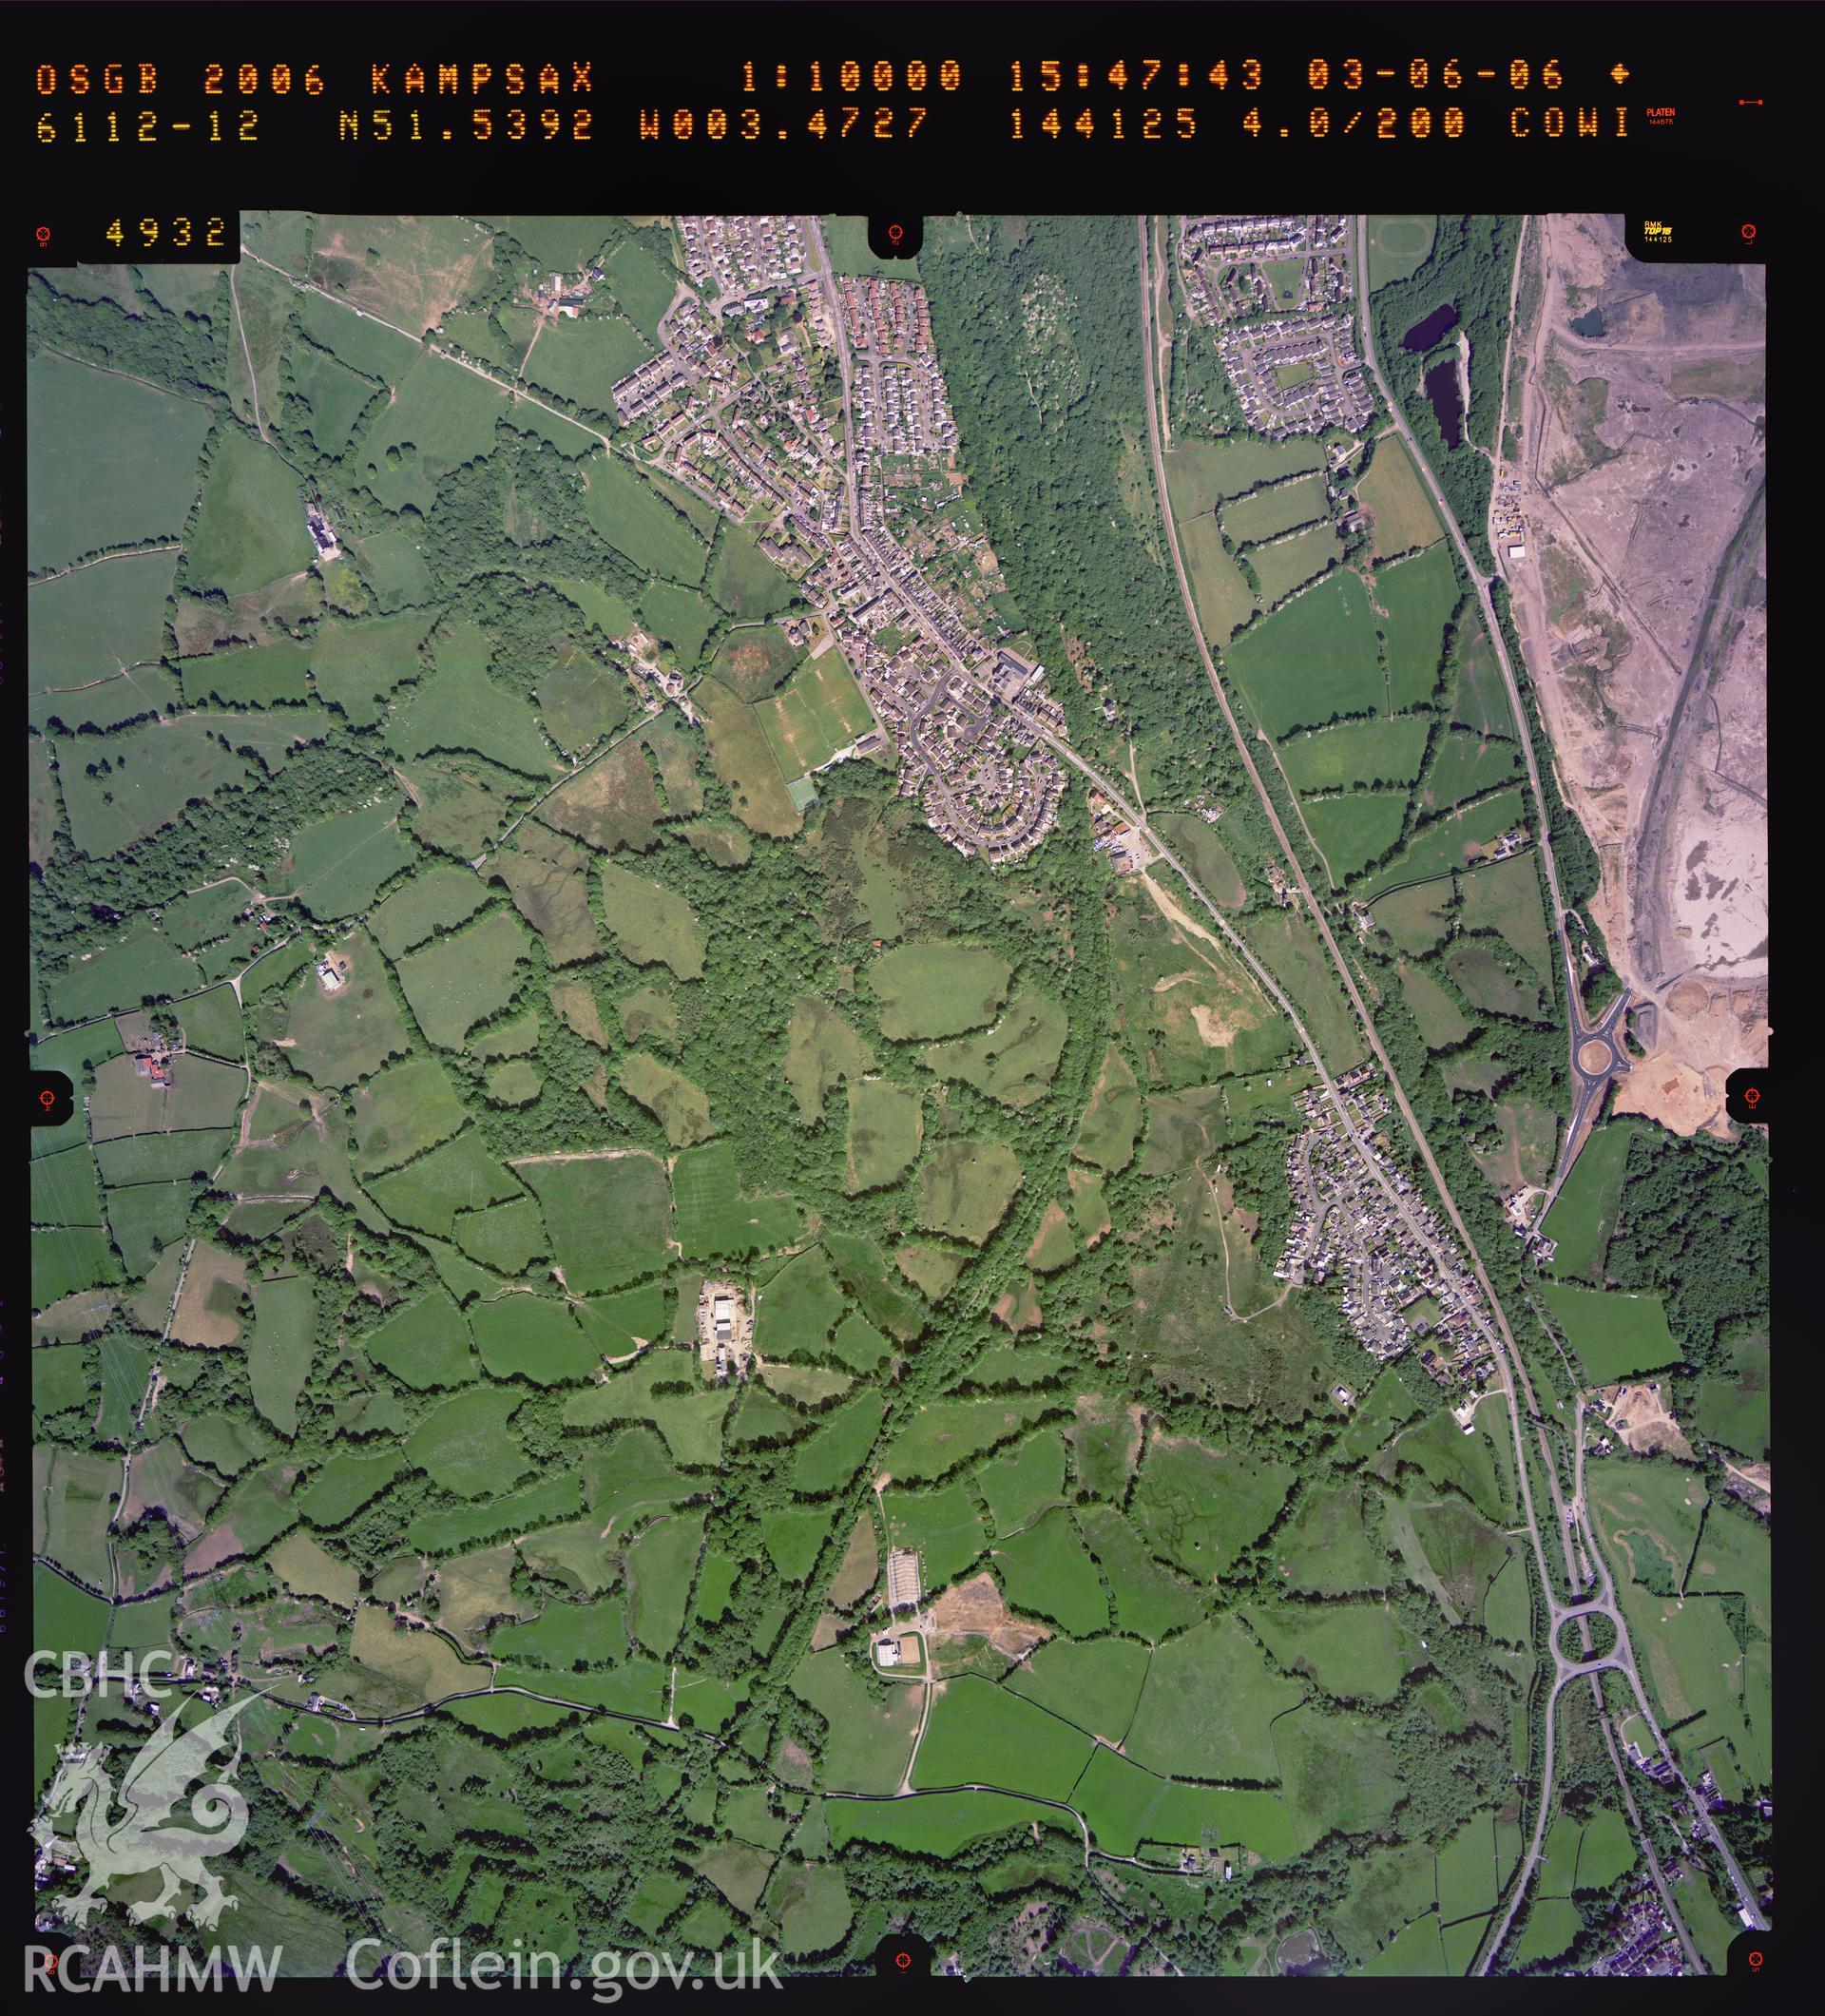 Digitized copy of a colour aerial photograph showing the area around Brynna, taken by Ordnance Survey, 2006.